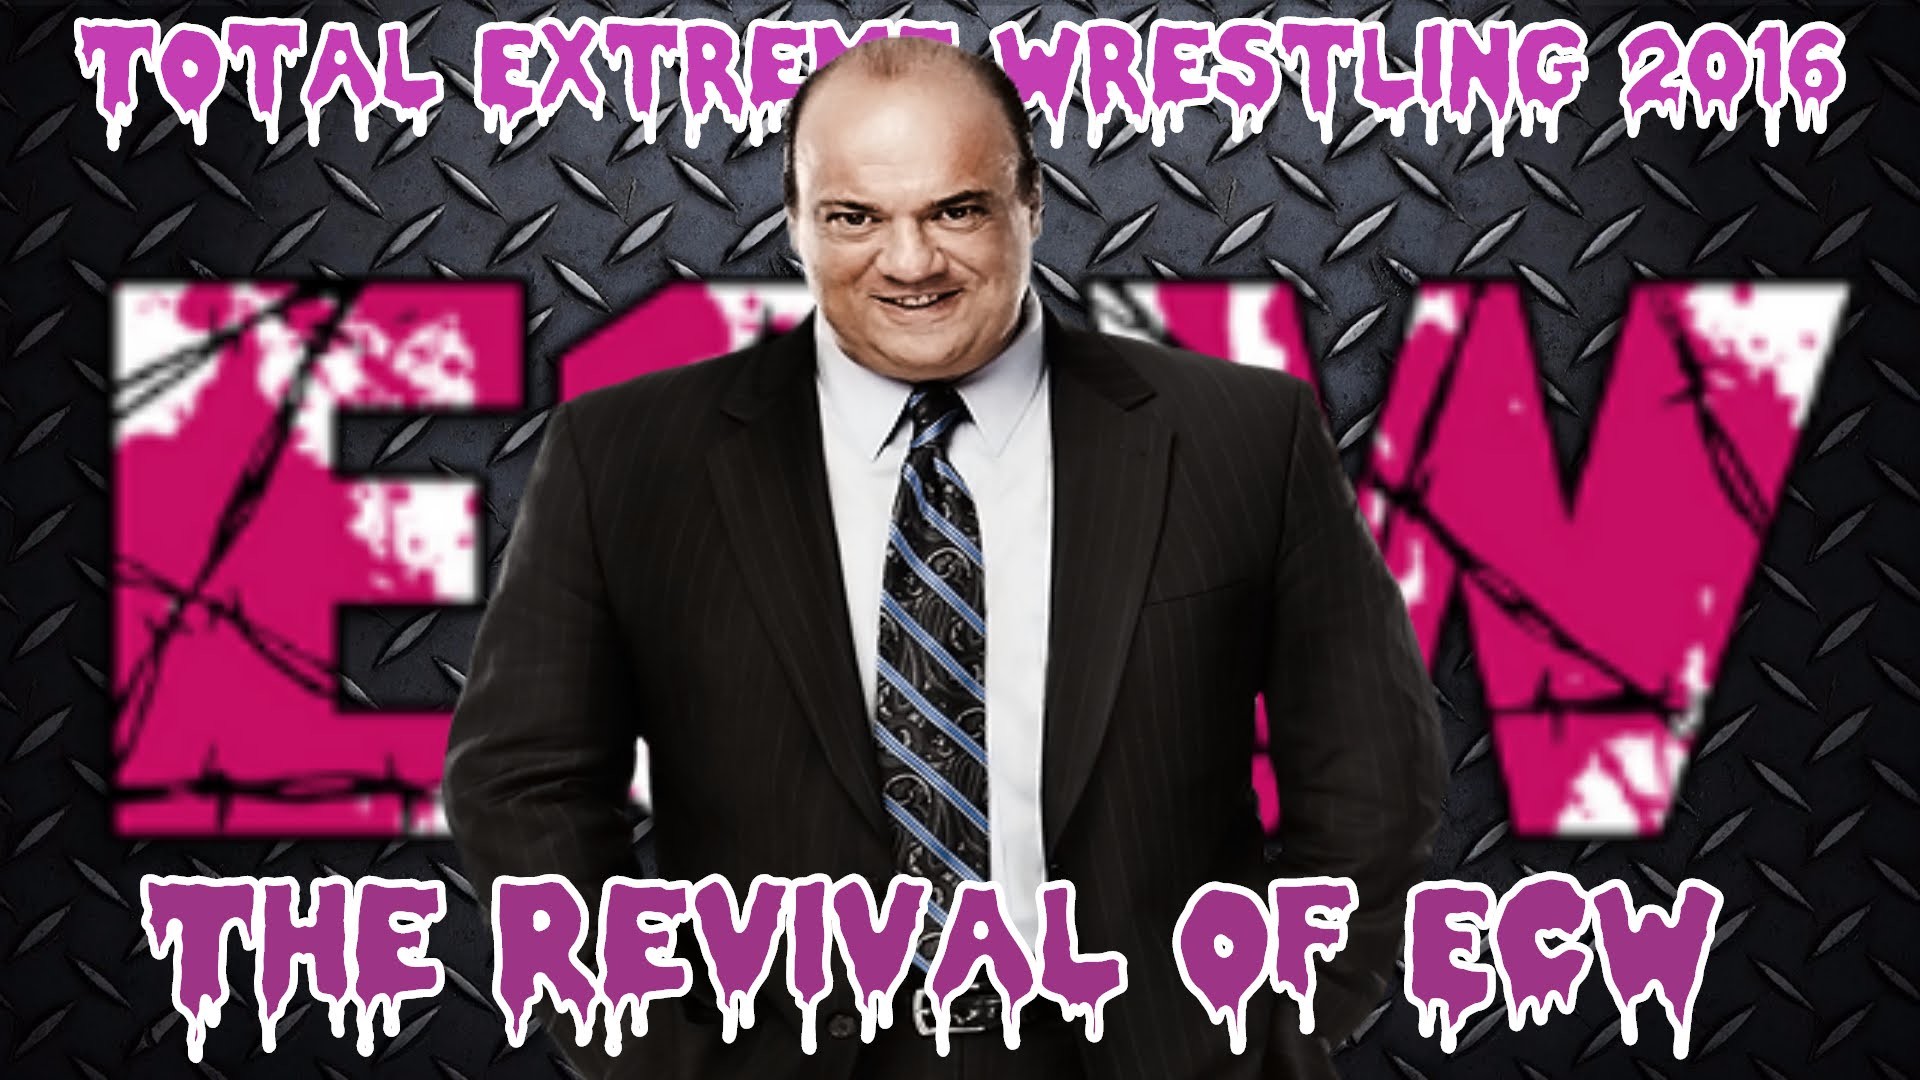 1920x1080 Let's Play TEW 2016: The Revival of ECW Episode 1 - This Is Extreme!